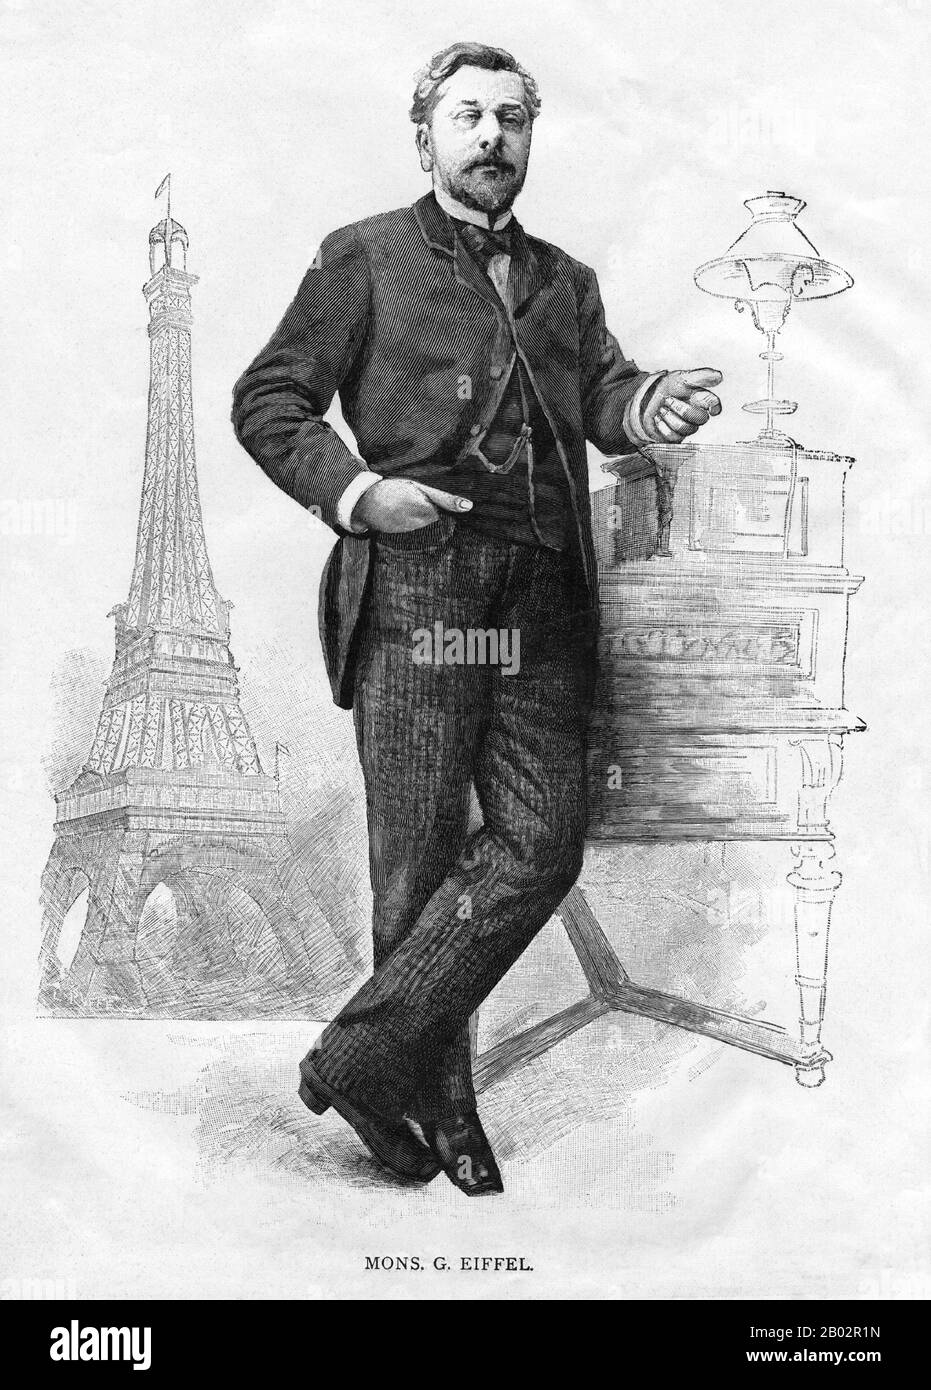 Alexandre Gustave Eiffel (born Bönickhausen, 15 December 1832 – 27 December 1923) was a French civil engineer and architect. A graduate of the École Centrale des Arts et Manufactures, he made his name with various bridges for the French railway network, most famously the Garabit viaduct.  He is best known for the world-famous Eiffel Tower, built for the 1889 Universal Exposition in Paris, France. After his retirement from engineering, Eiffel concentrated his energies on research into meteorology and aerodynamics, making important contributions in both fields.  Eiffel's best-known works in Asia Stock Photo